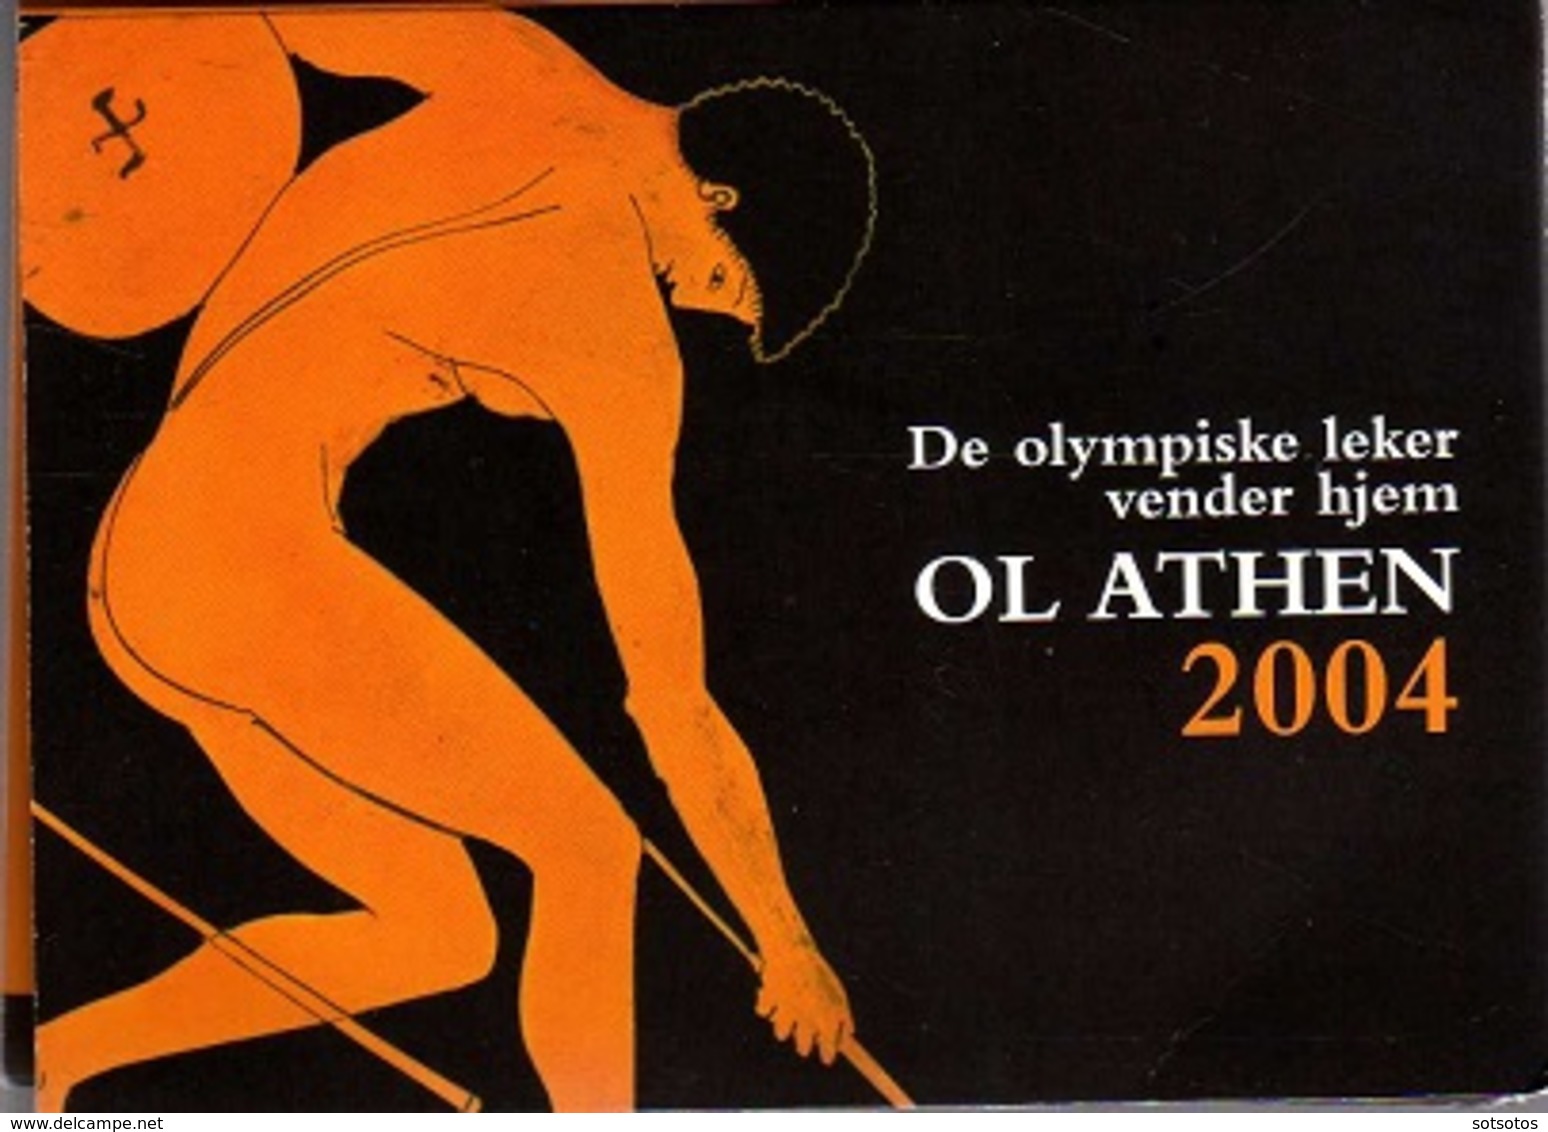 OLYMPIC GAMES Of ATHENS 2004. Folder Containing 2 Coins 1$ British Virgin Islands + 2€ From Greece - Jungferninseln, Britische